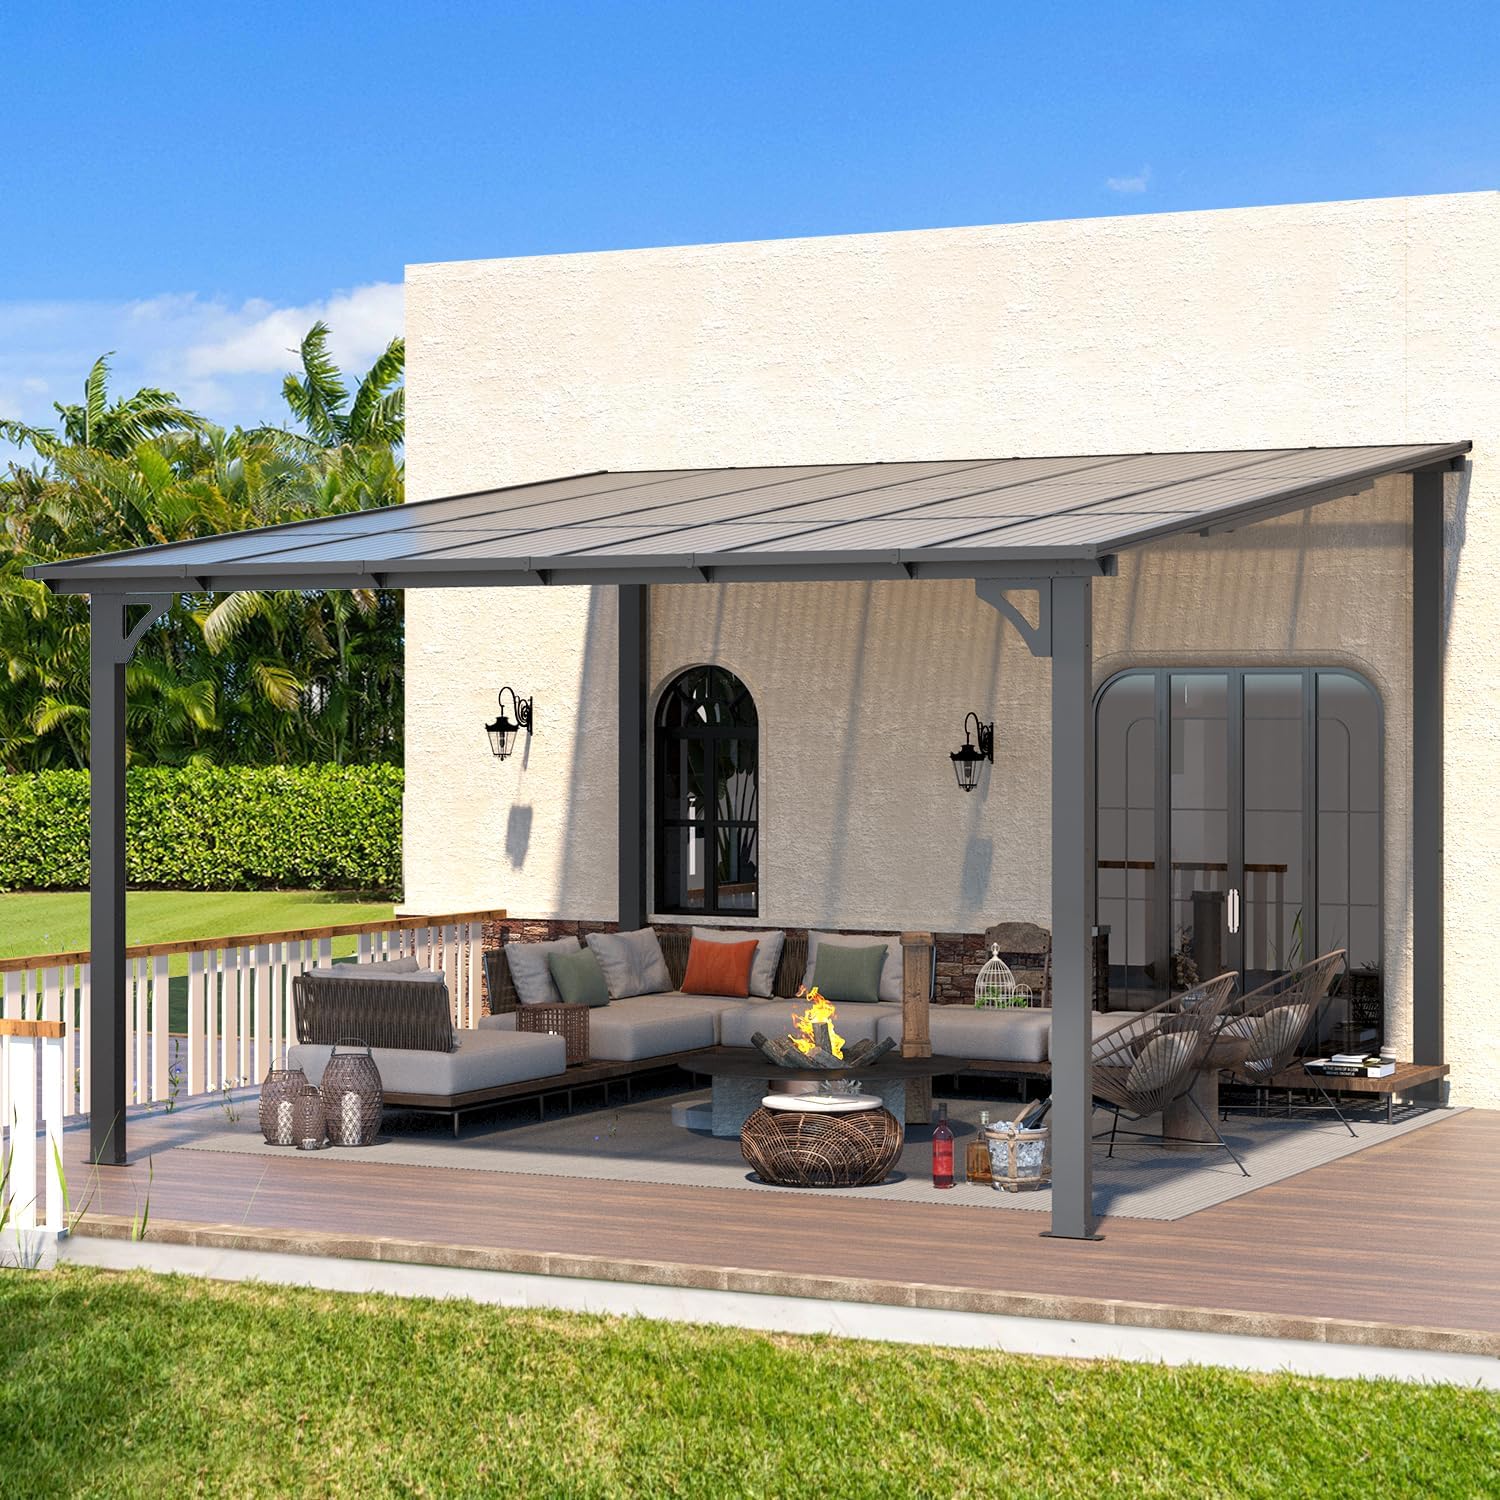 AECOJOY 12' x 12' Gazebo for Patio, Wall-Mounted Lean to Gazebo Pergola with Roof (144 Sq.Ft Shaded) on Clearance, Large Hard Top Heavy Duty Awnings for Decks, Backyard and More